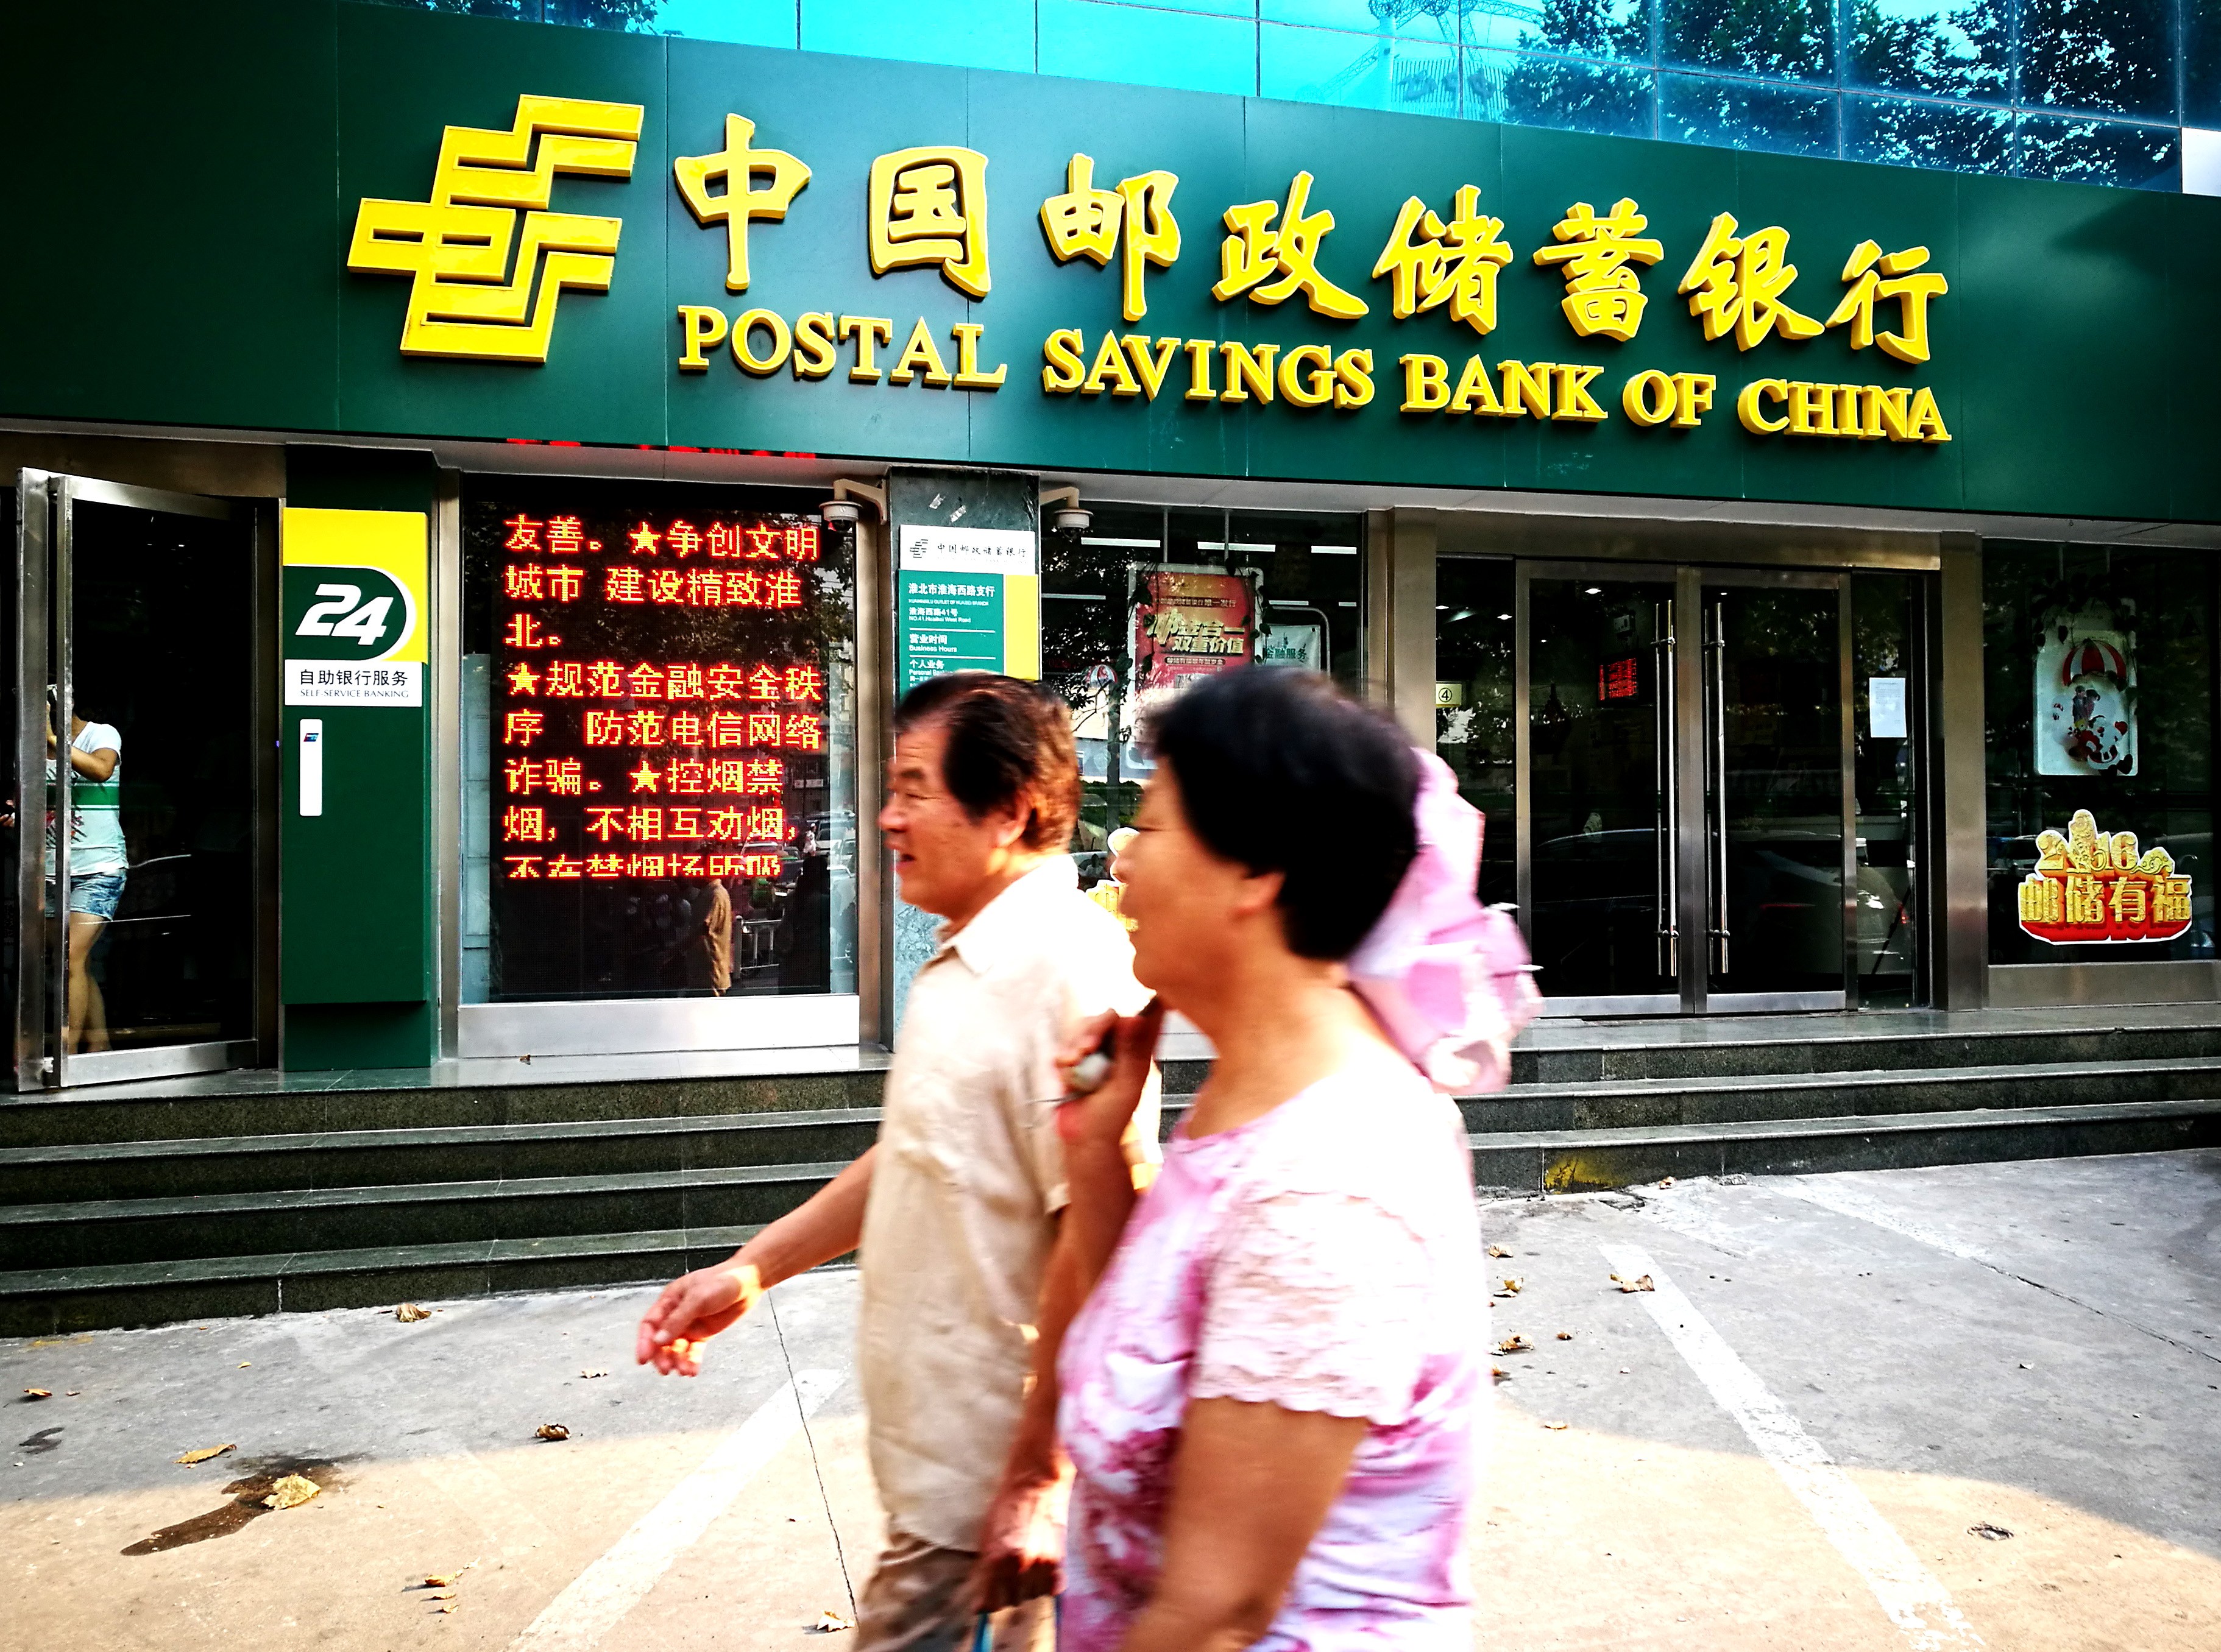 Pedestrians walk past a branch of Postal Saving Bank of China in Huaibei city, in China’s Anhui province. Photo: Imaginechina